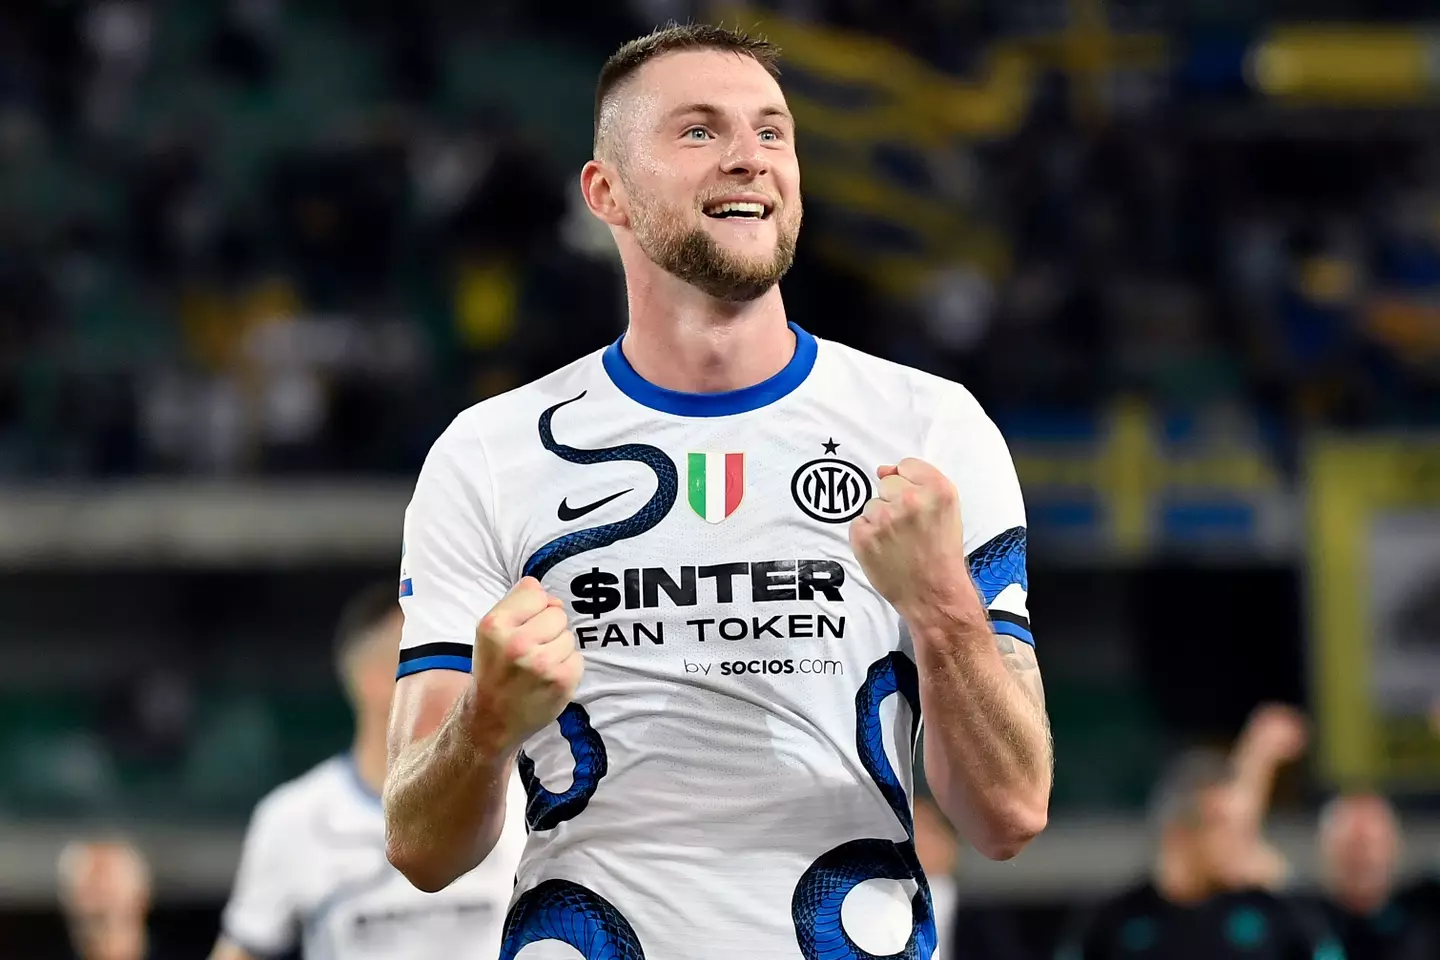 Skriniar has been linked with clubs in the past. Image: PA Images